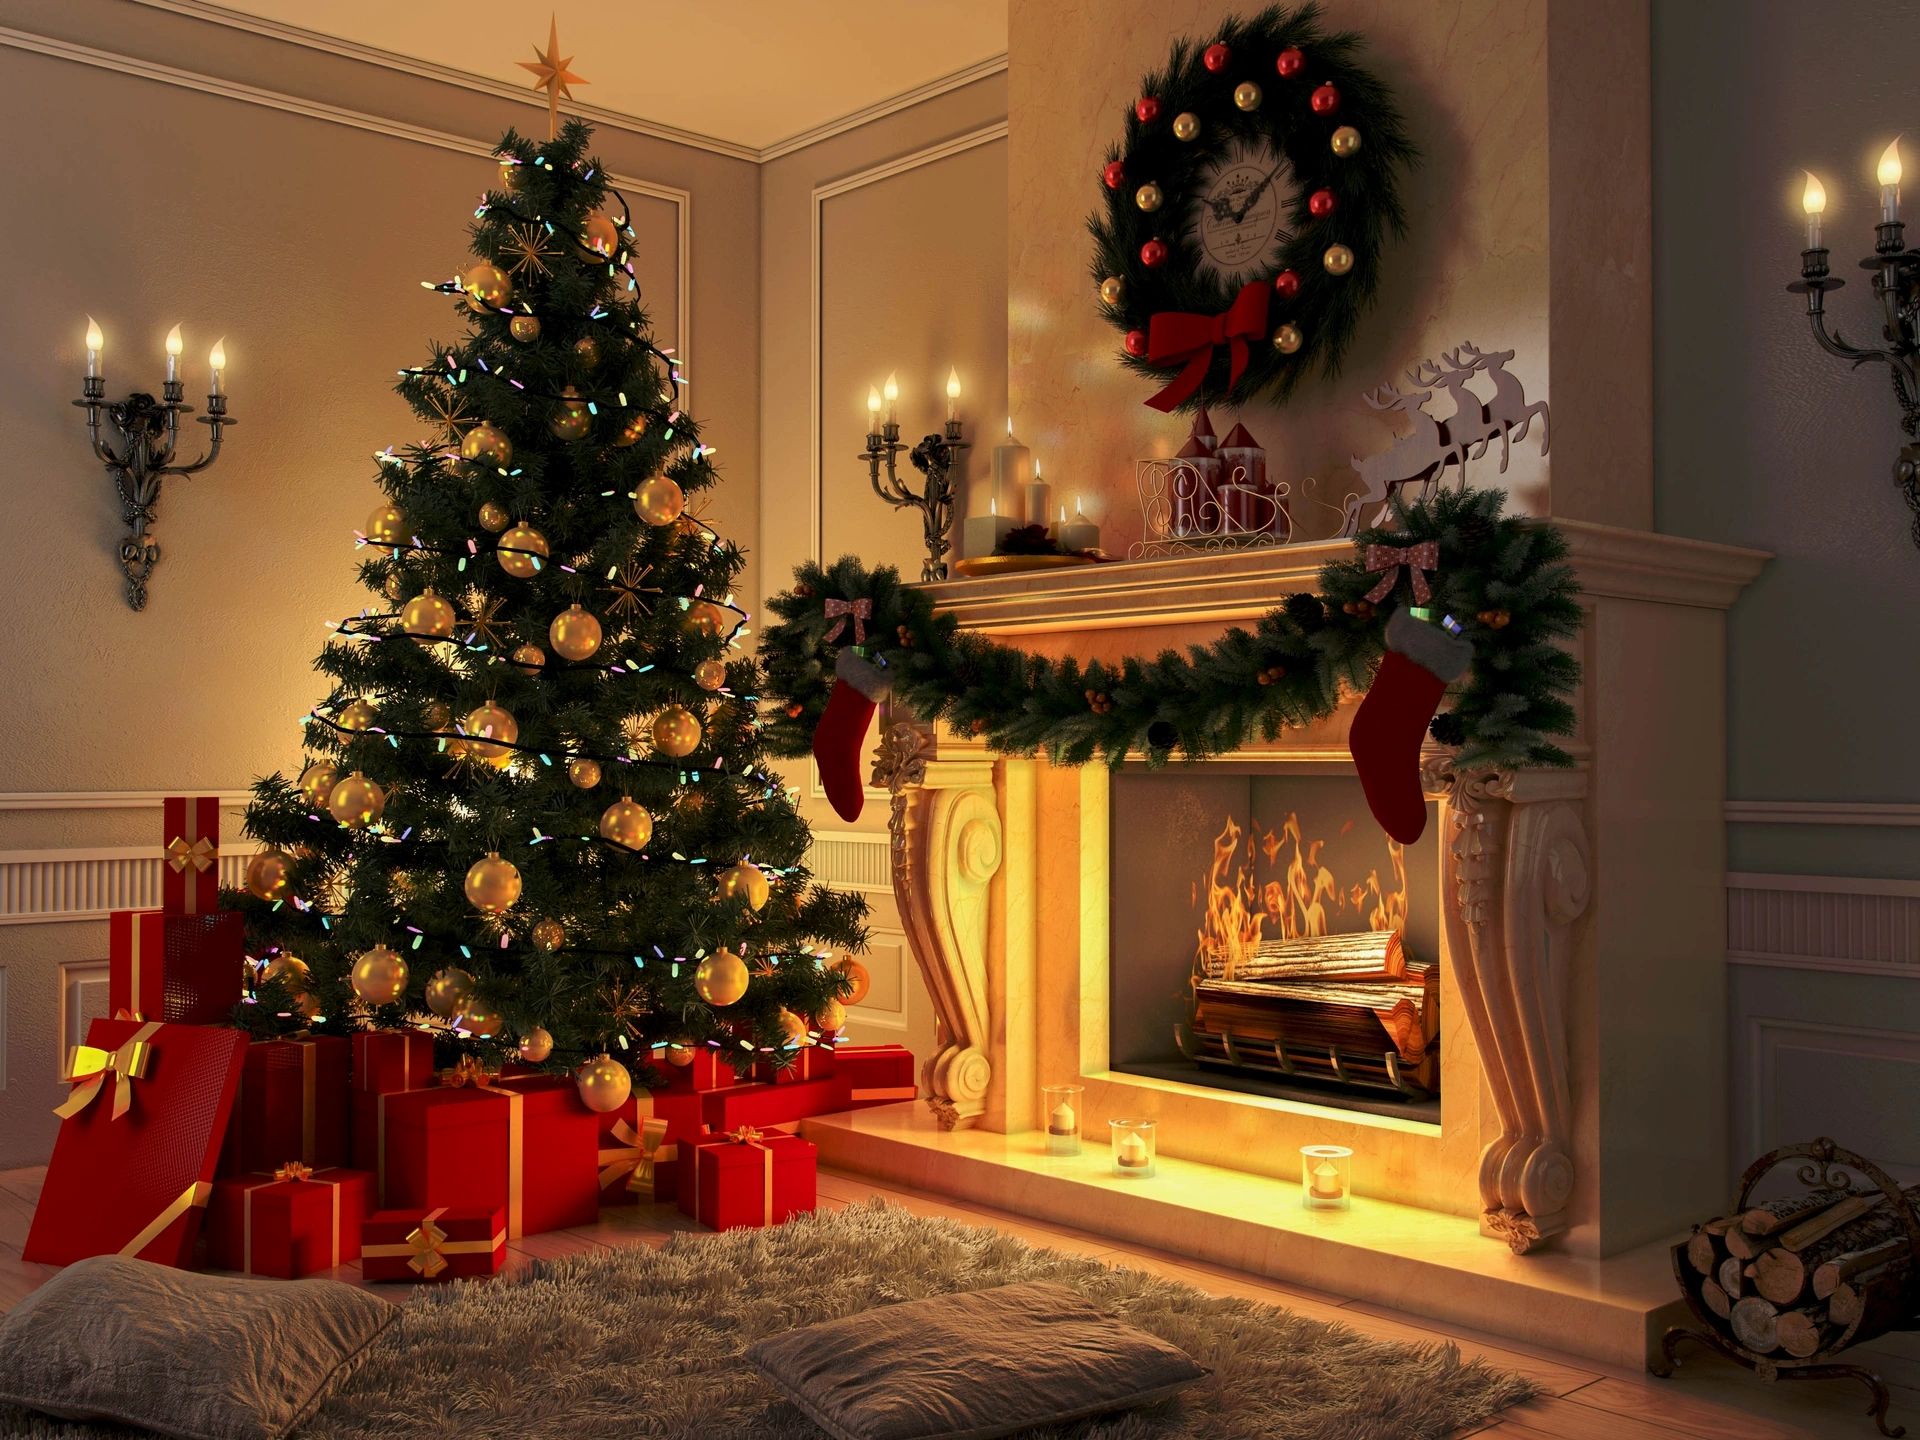 Glowing fireplace with red gifts under Christmas tree, mantle swag, and wreath above